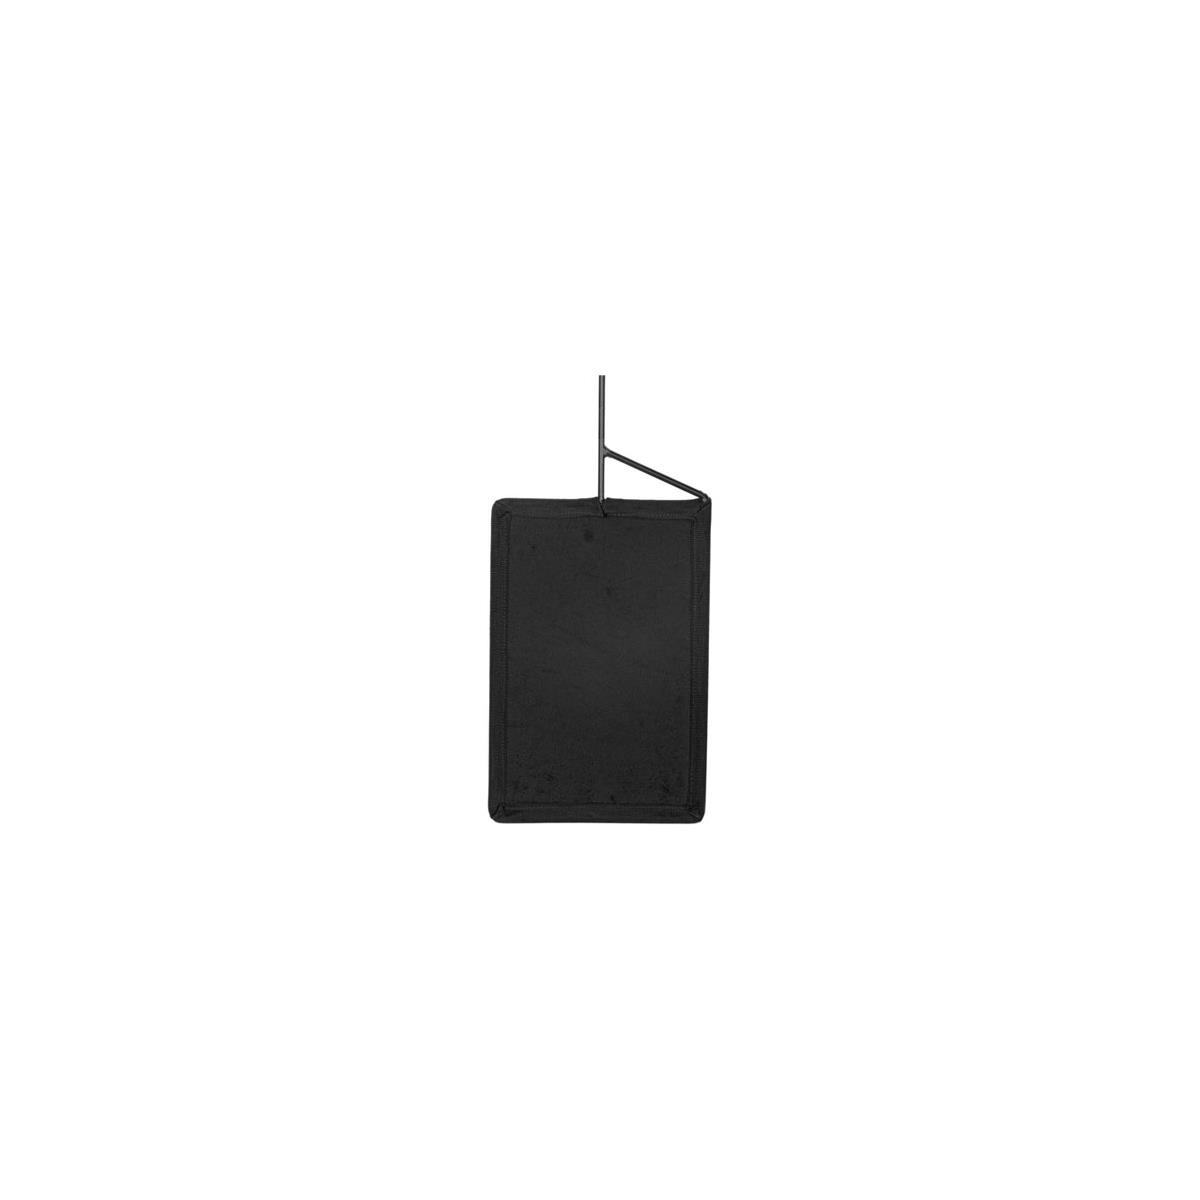 Image of Matthews 169042 12x18in Flag with Black Textile